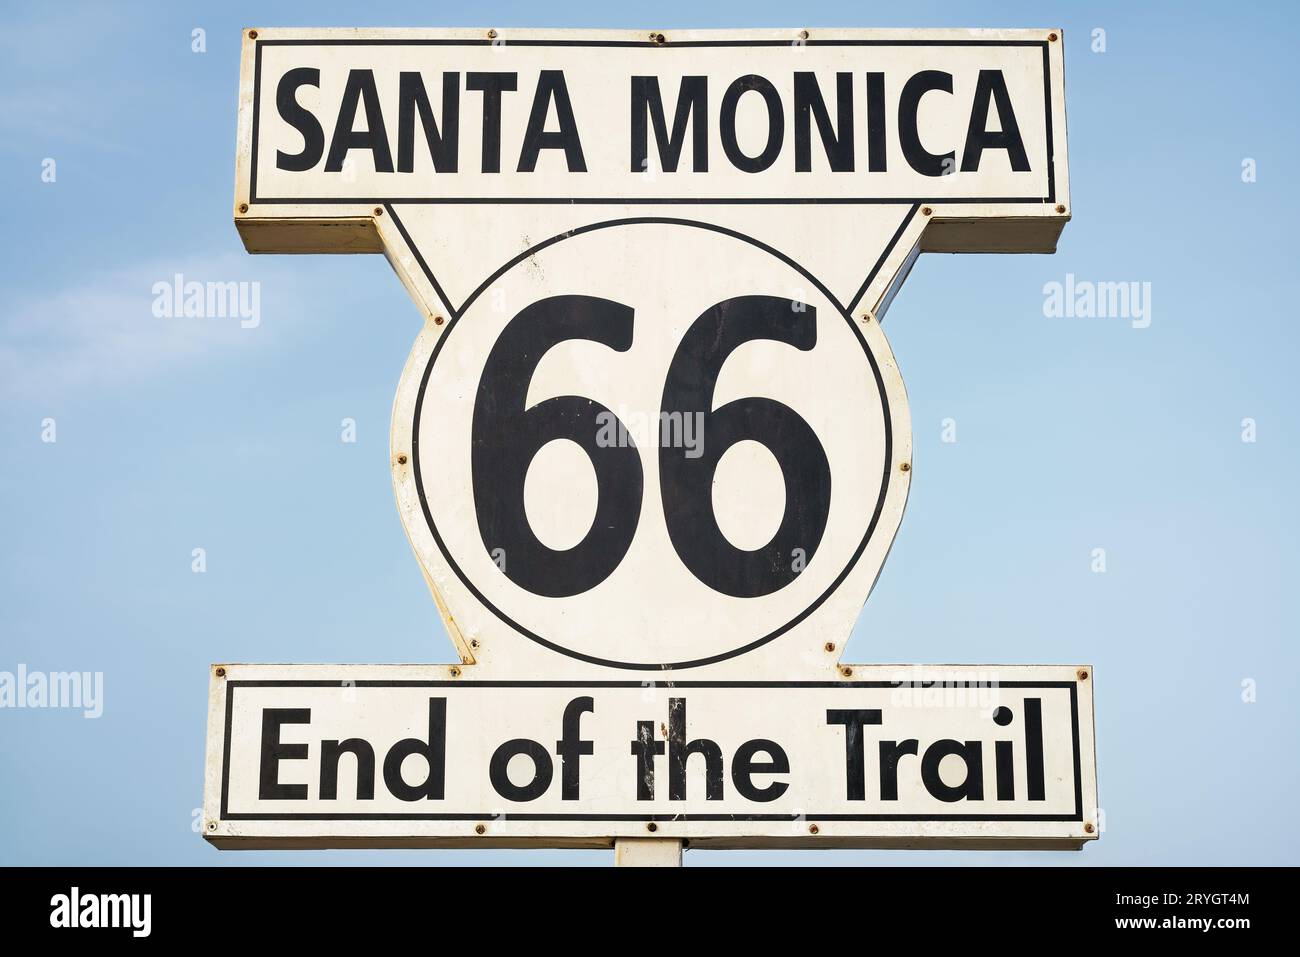 Route 66 sign, End of the Trail in Santa Monica, Los Angeles, USA. Stock Photo